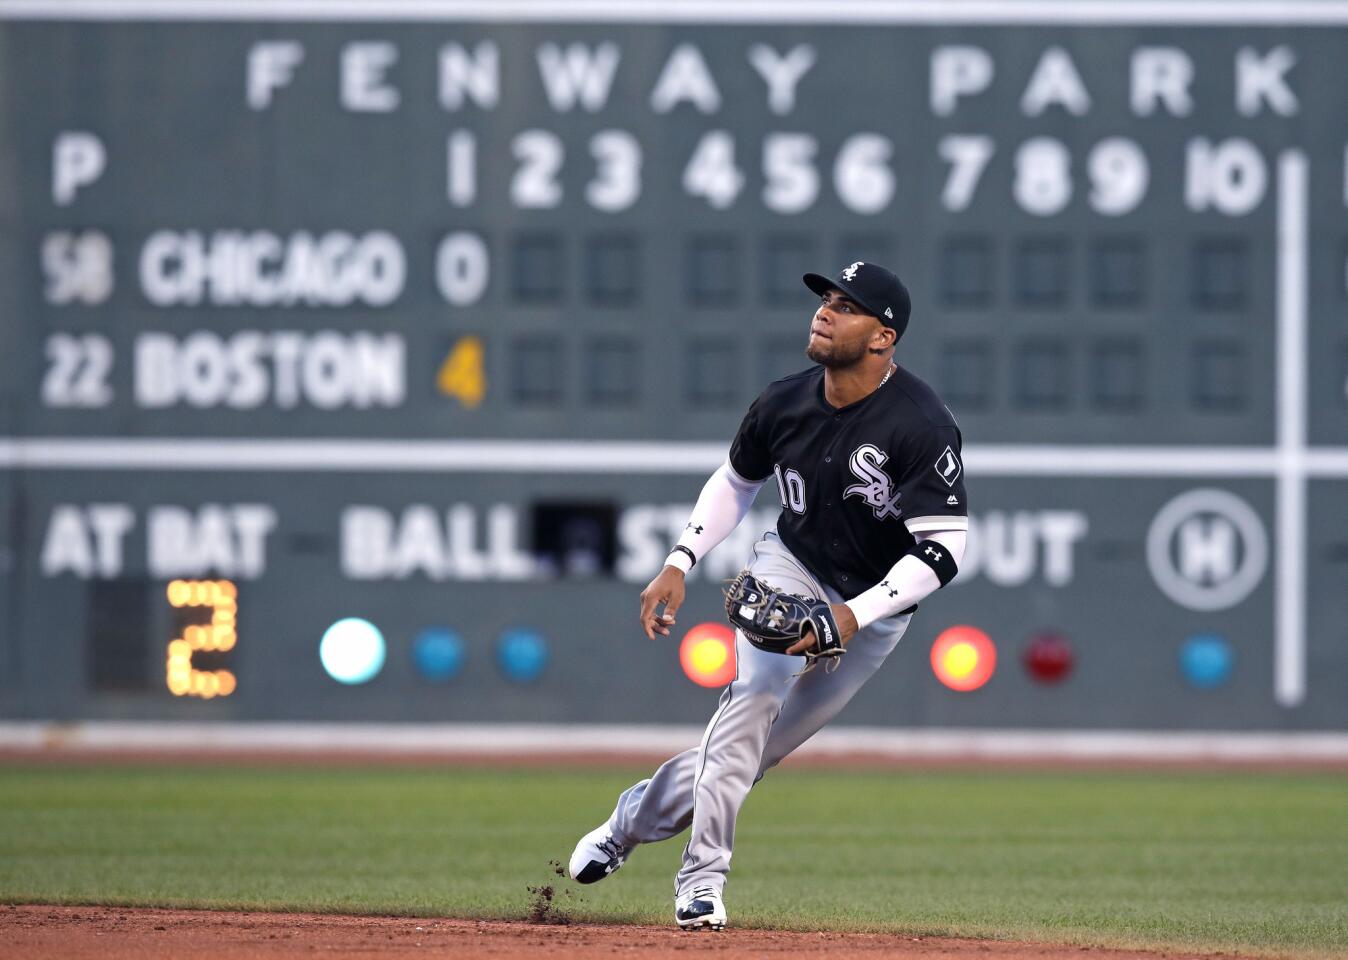 Yoan Moncada, a former Red Sox minor league prospect, tracks the ball on a fly out during the first inning of a game at Fenway Park on Aug. 3, 2017.